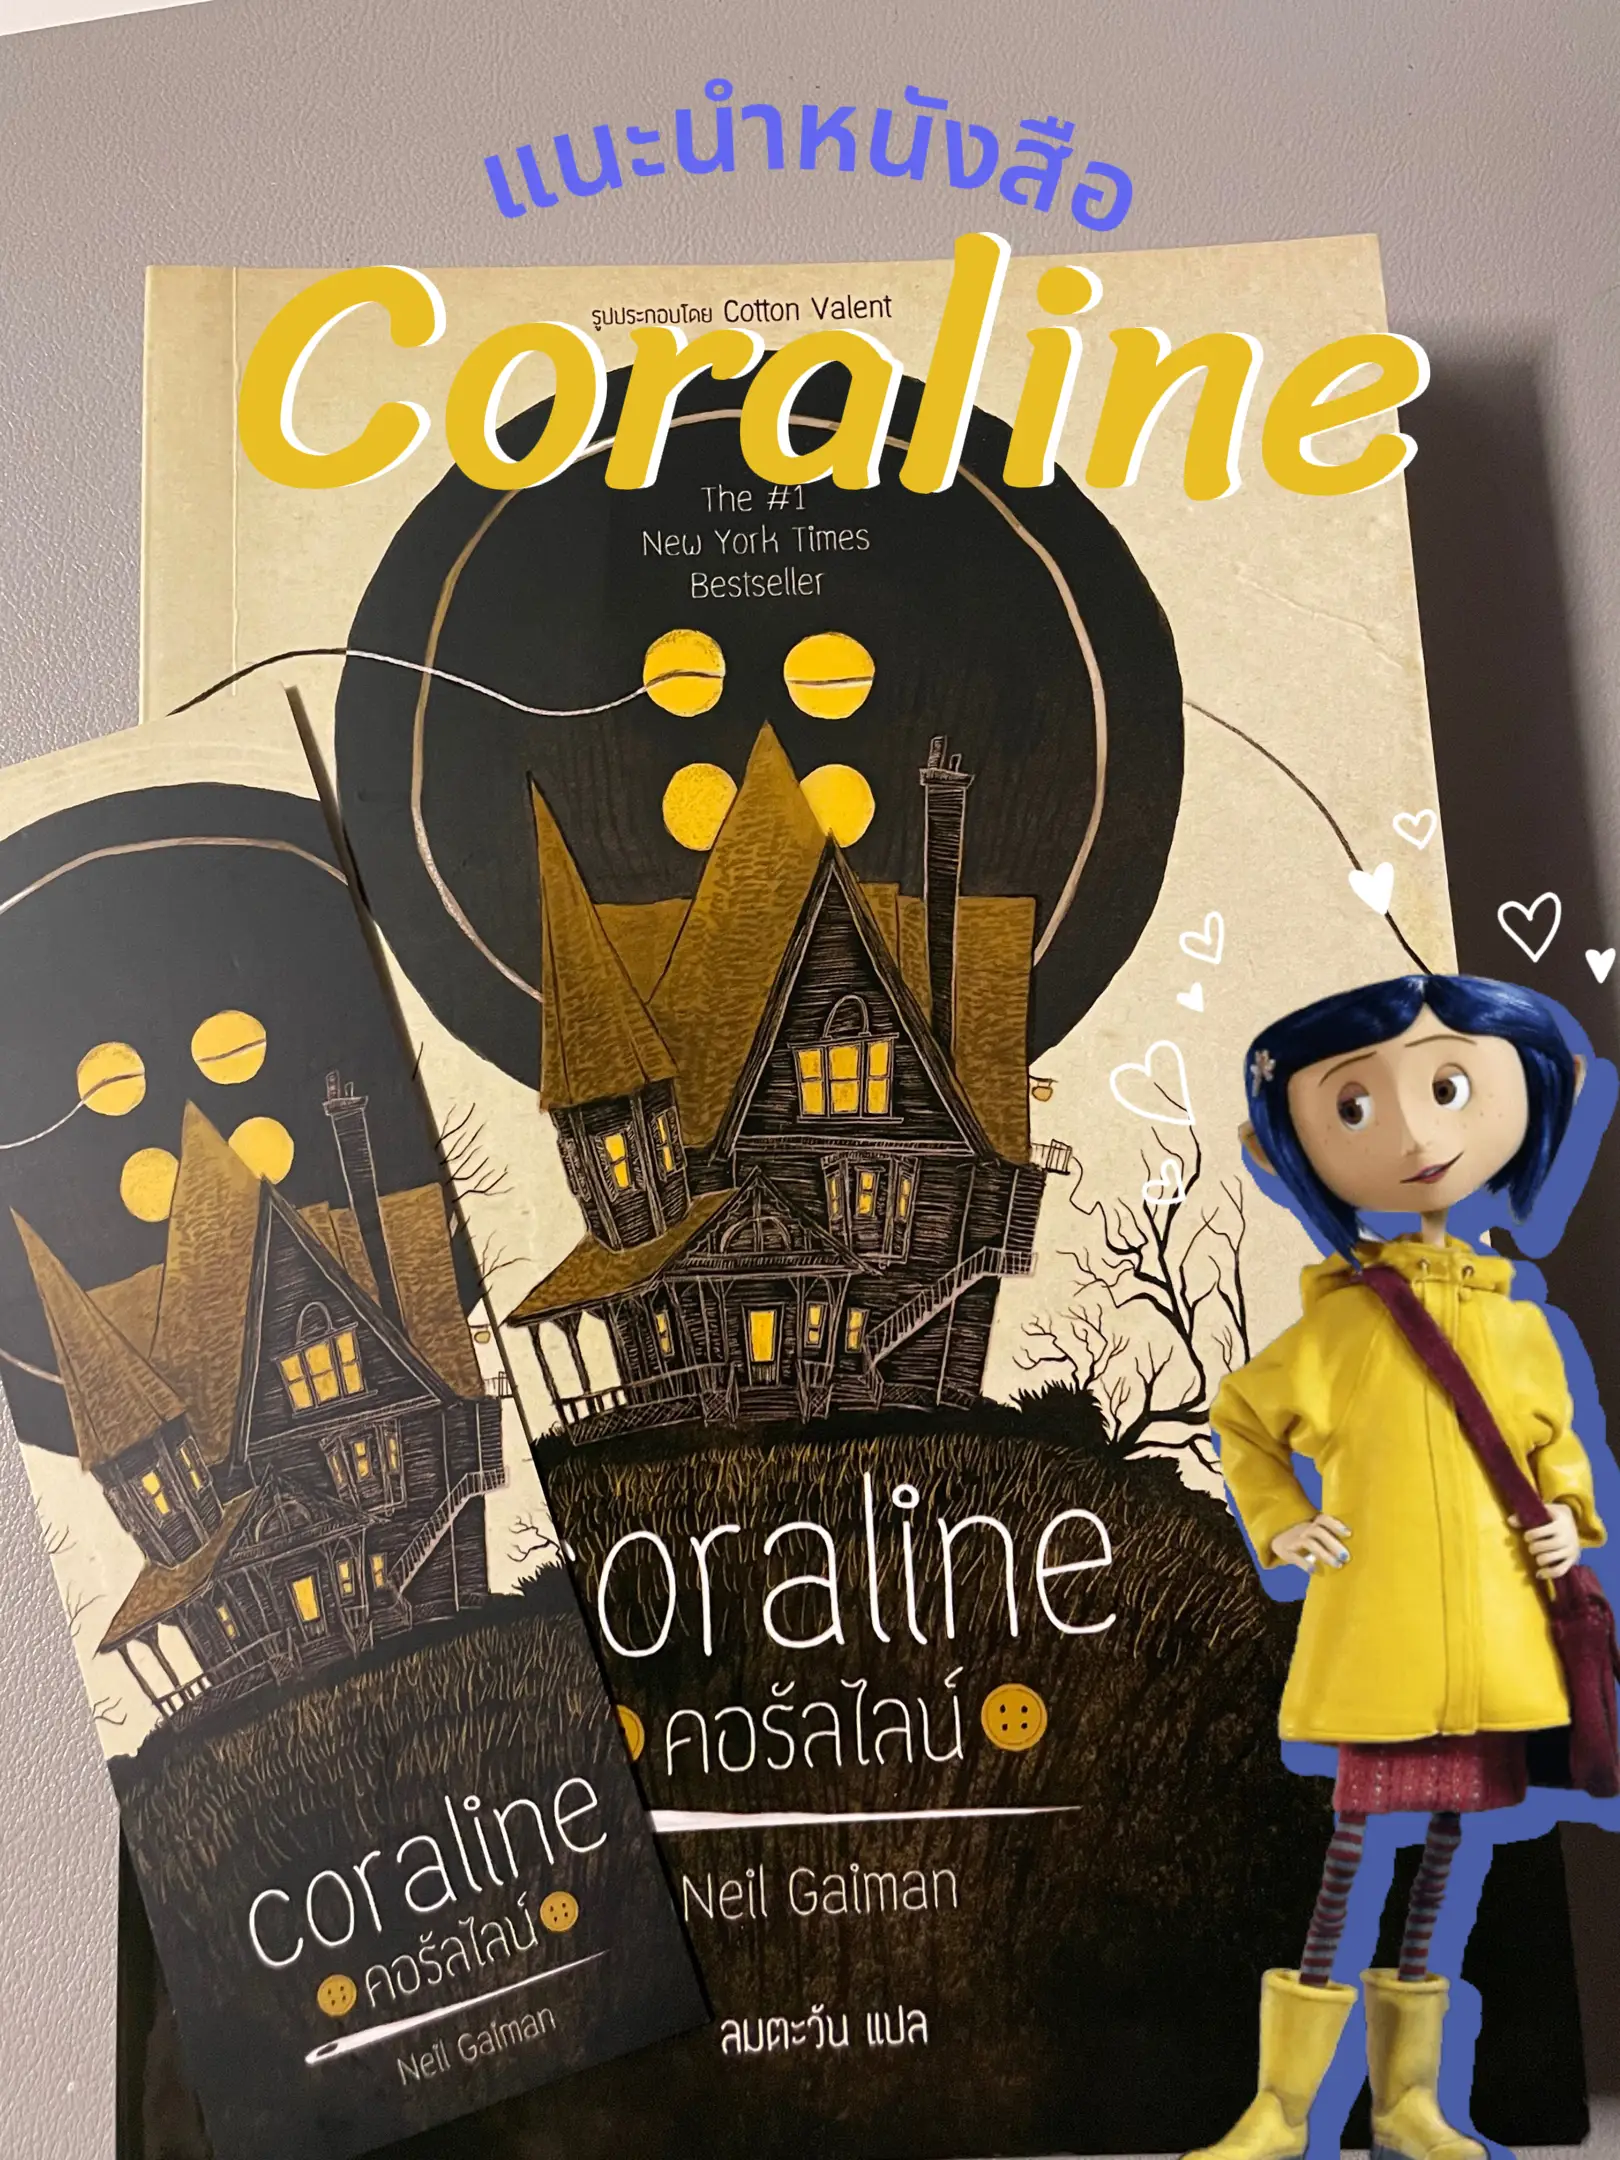 Introducing the book Coraline Coral Line, Gallery posted by miwprinkle